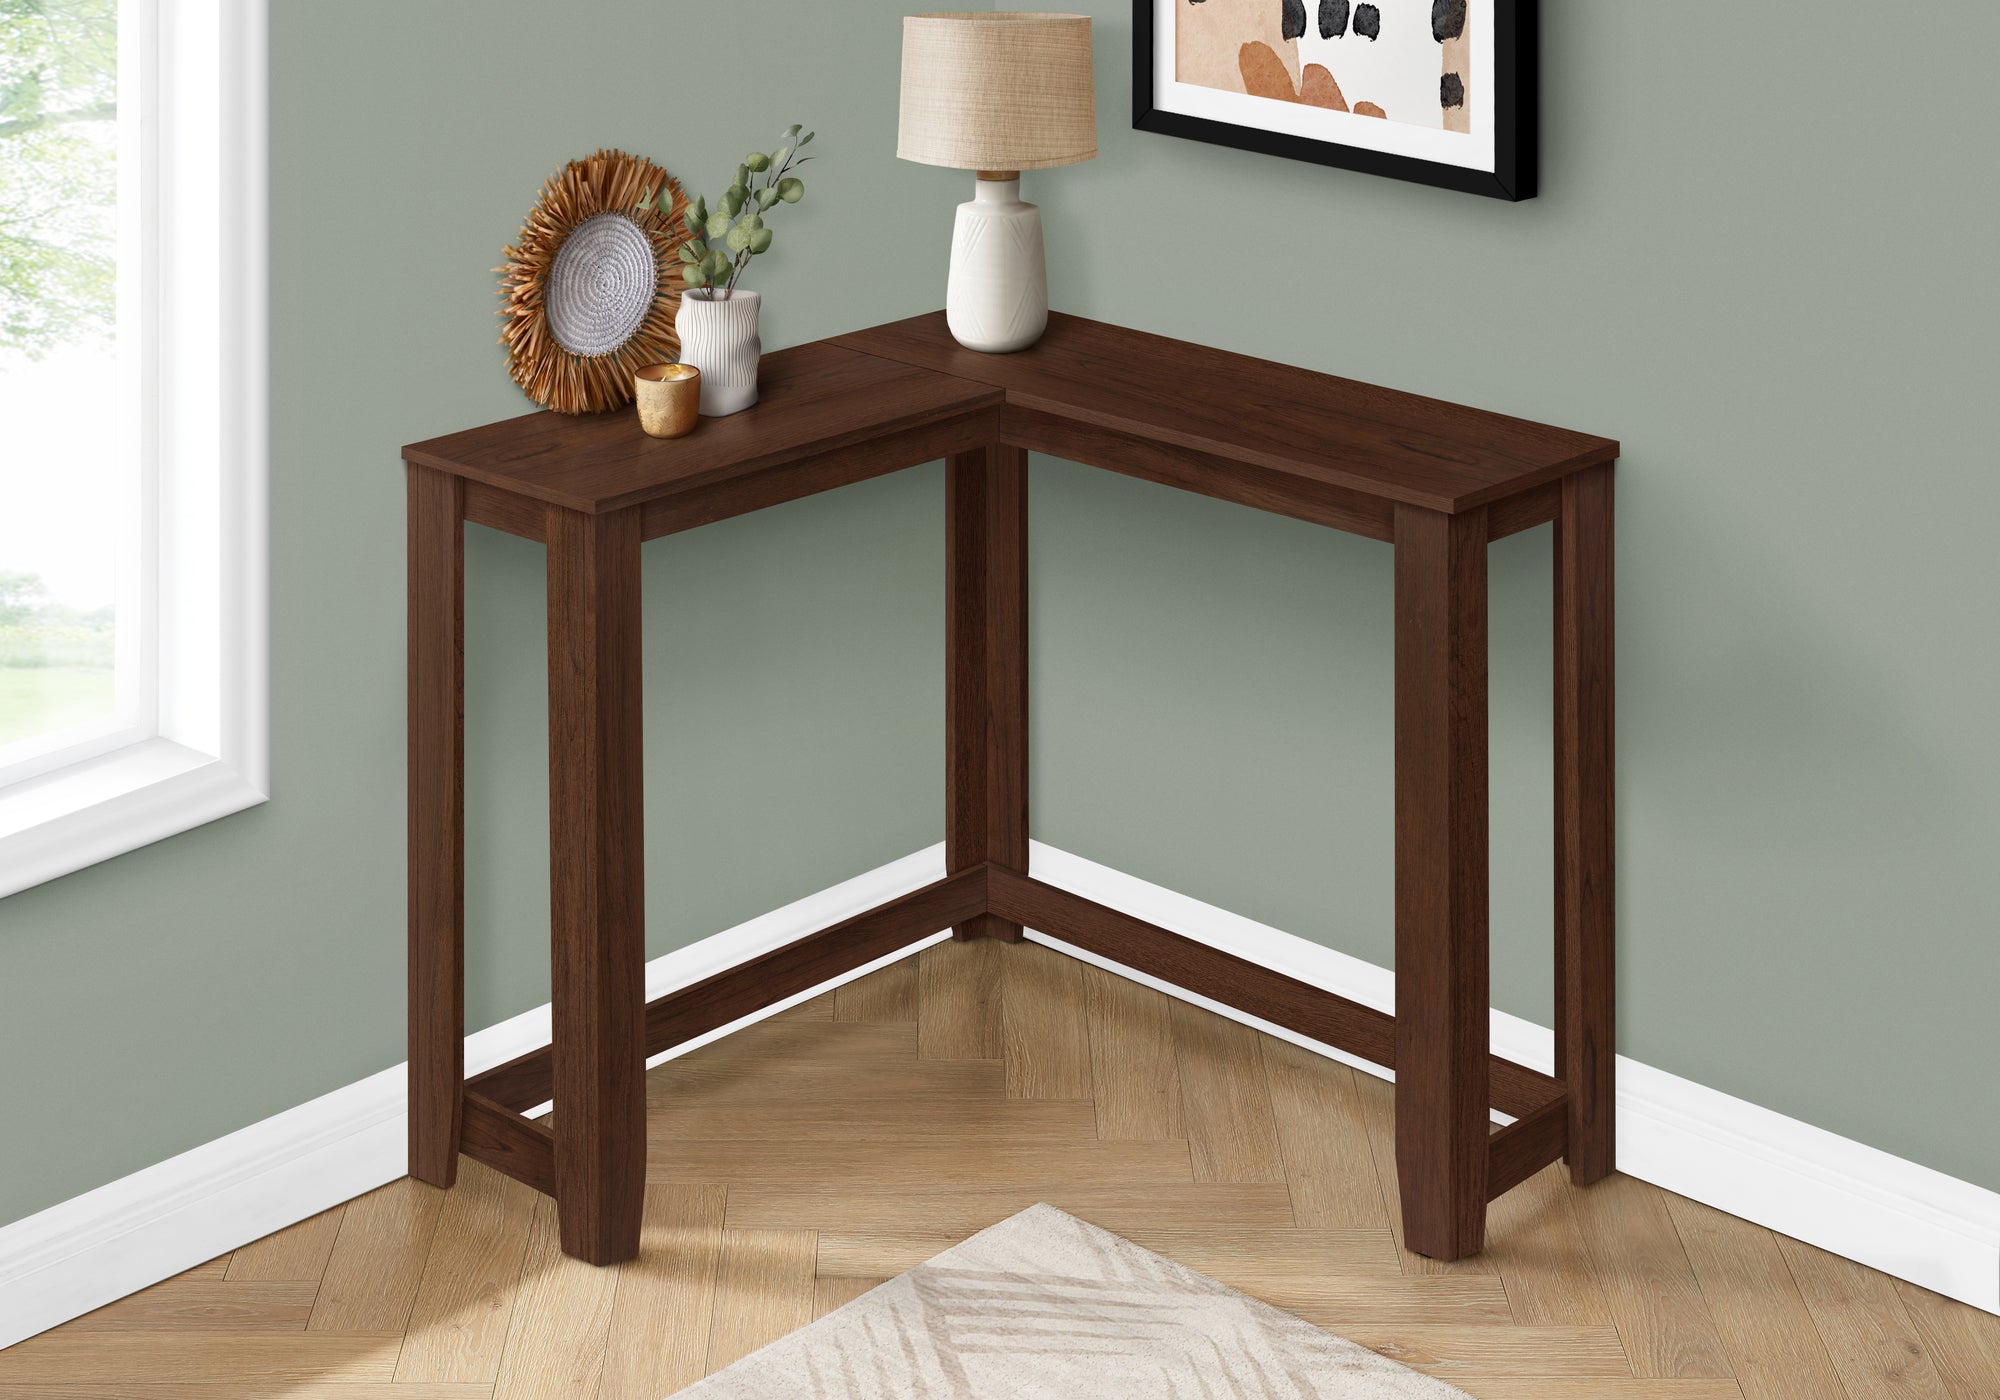 MN-133661    Accent Table, Console, Entryway, Narrow, Corner, Living Room, Bedroom, Laminate, Cherry, Contemporary, Modern